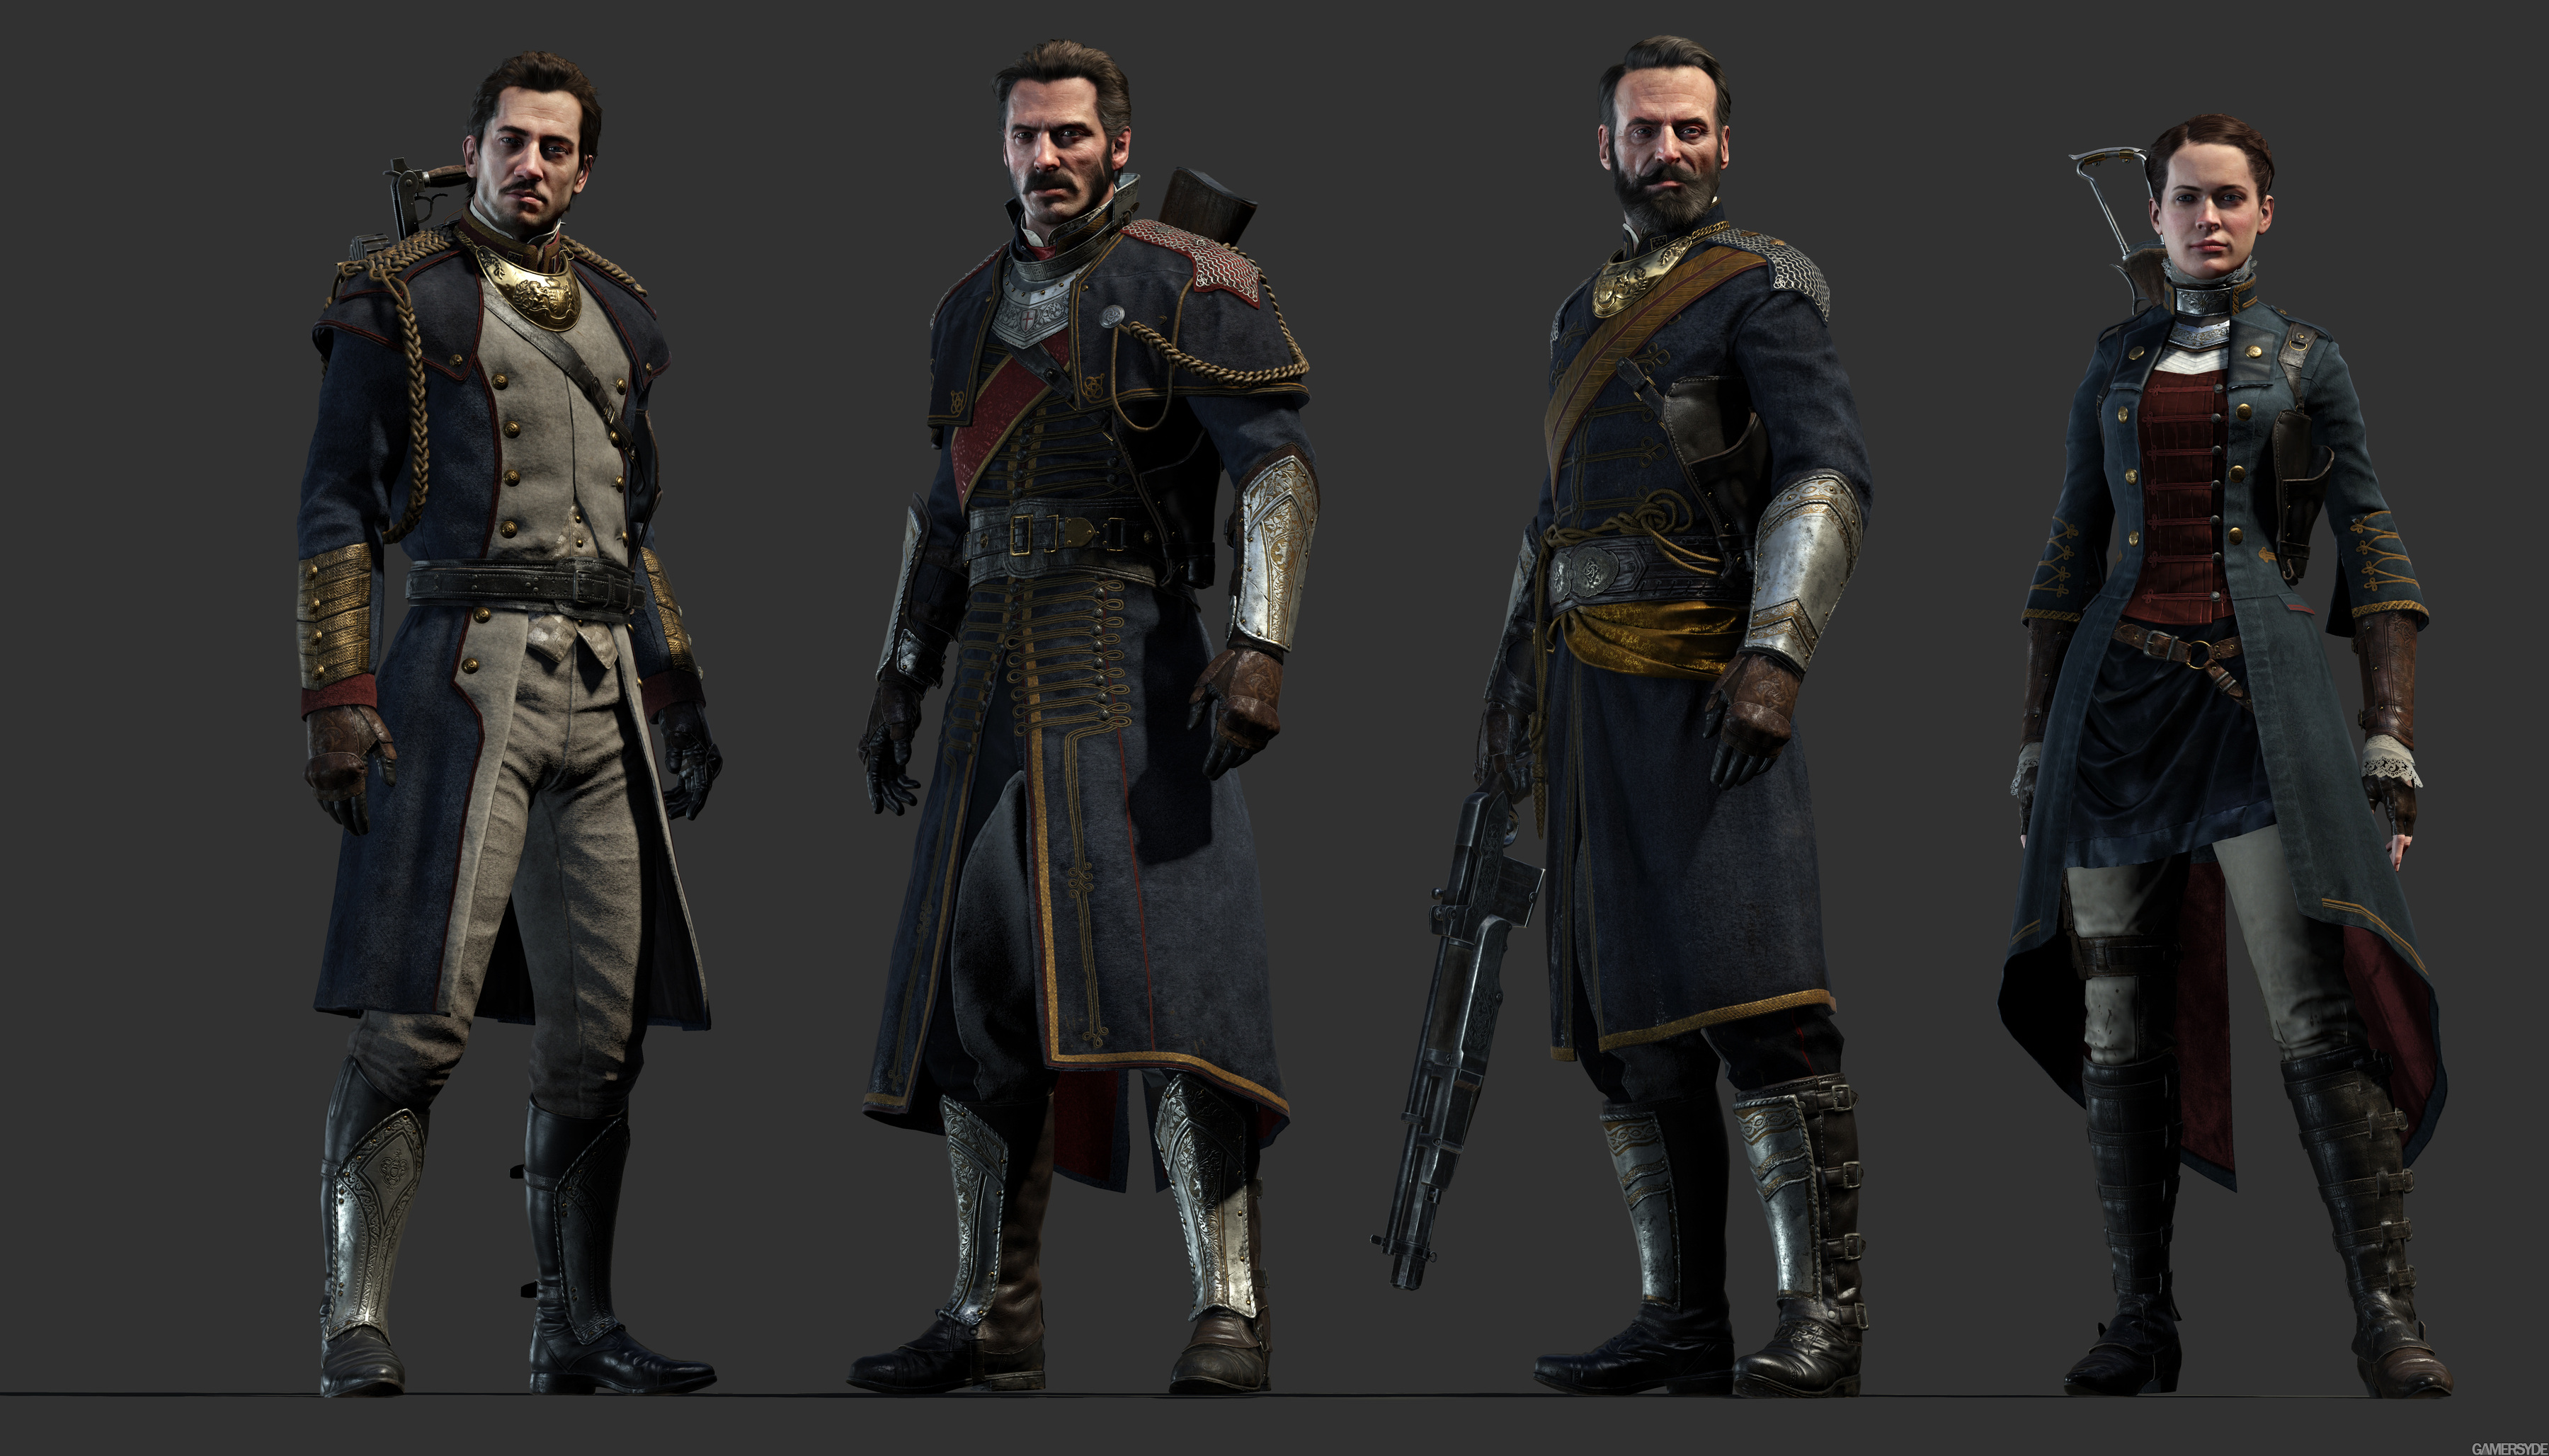 3600x2057 > The Order: 1886 Wallpapers